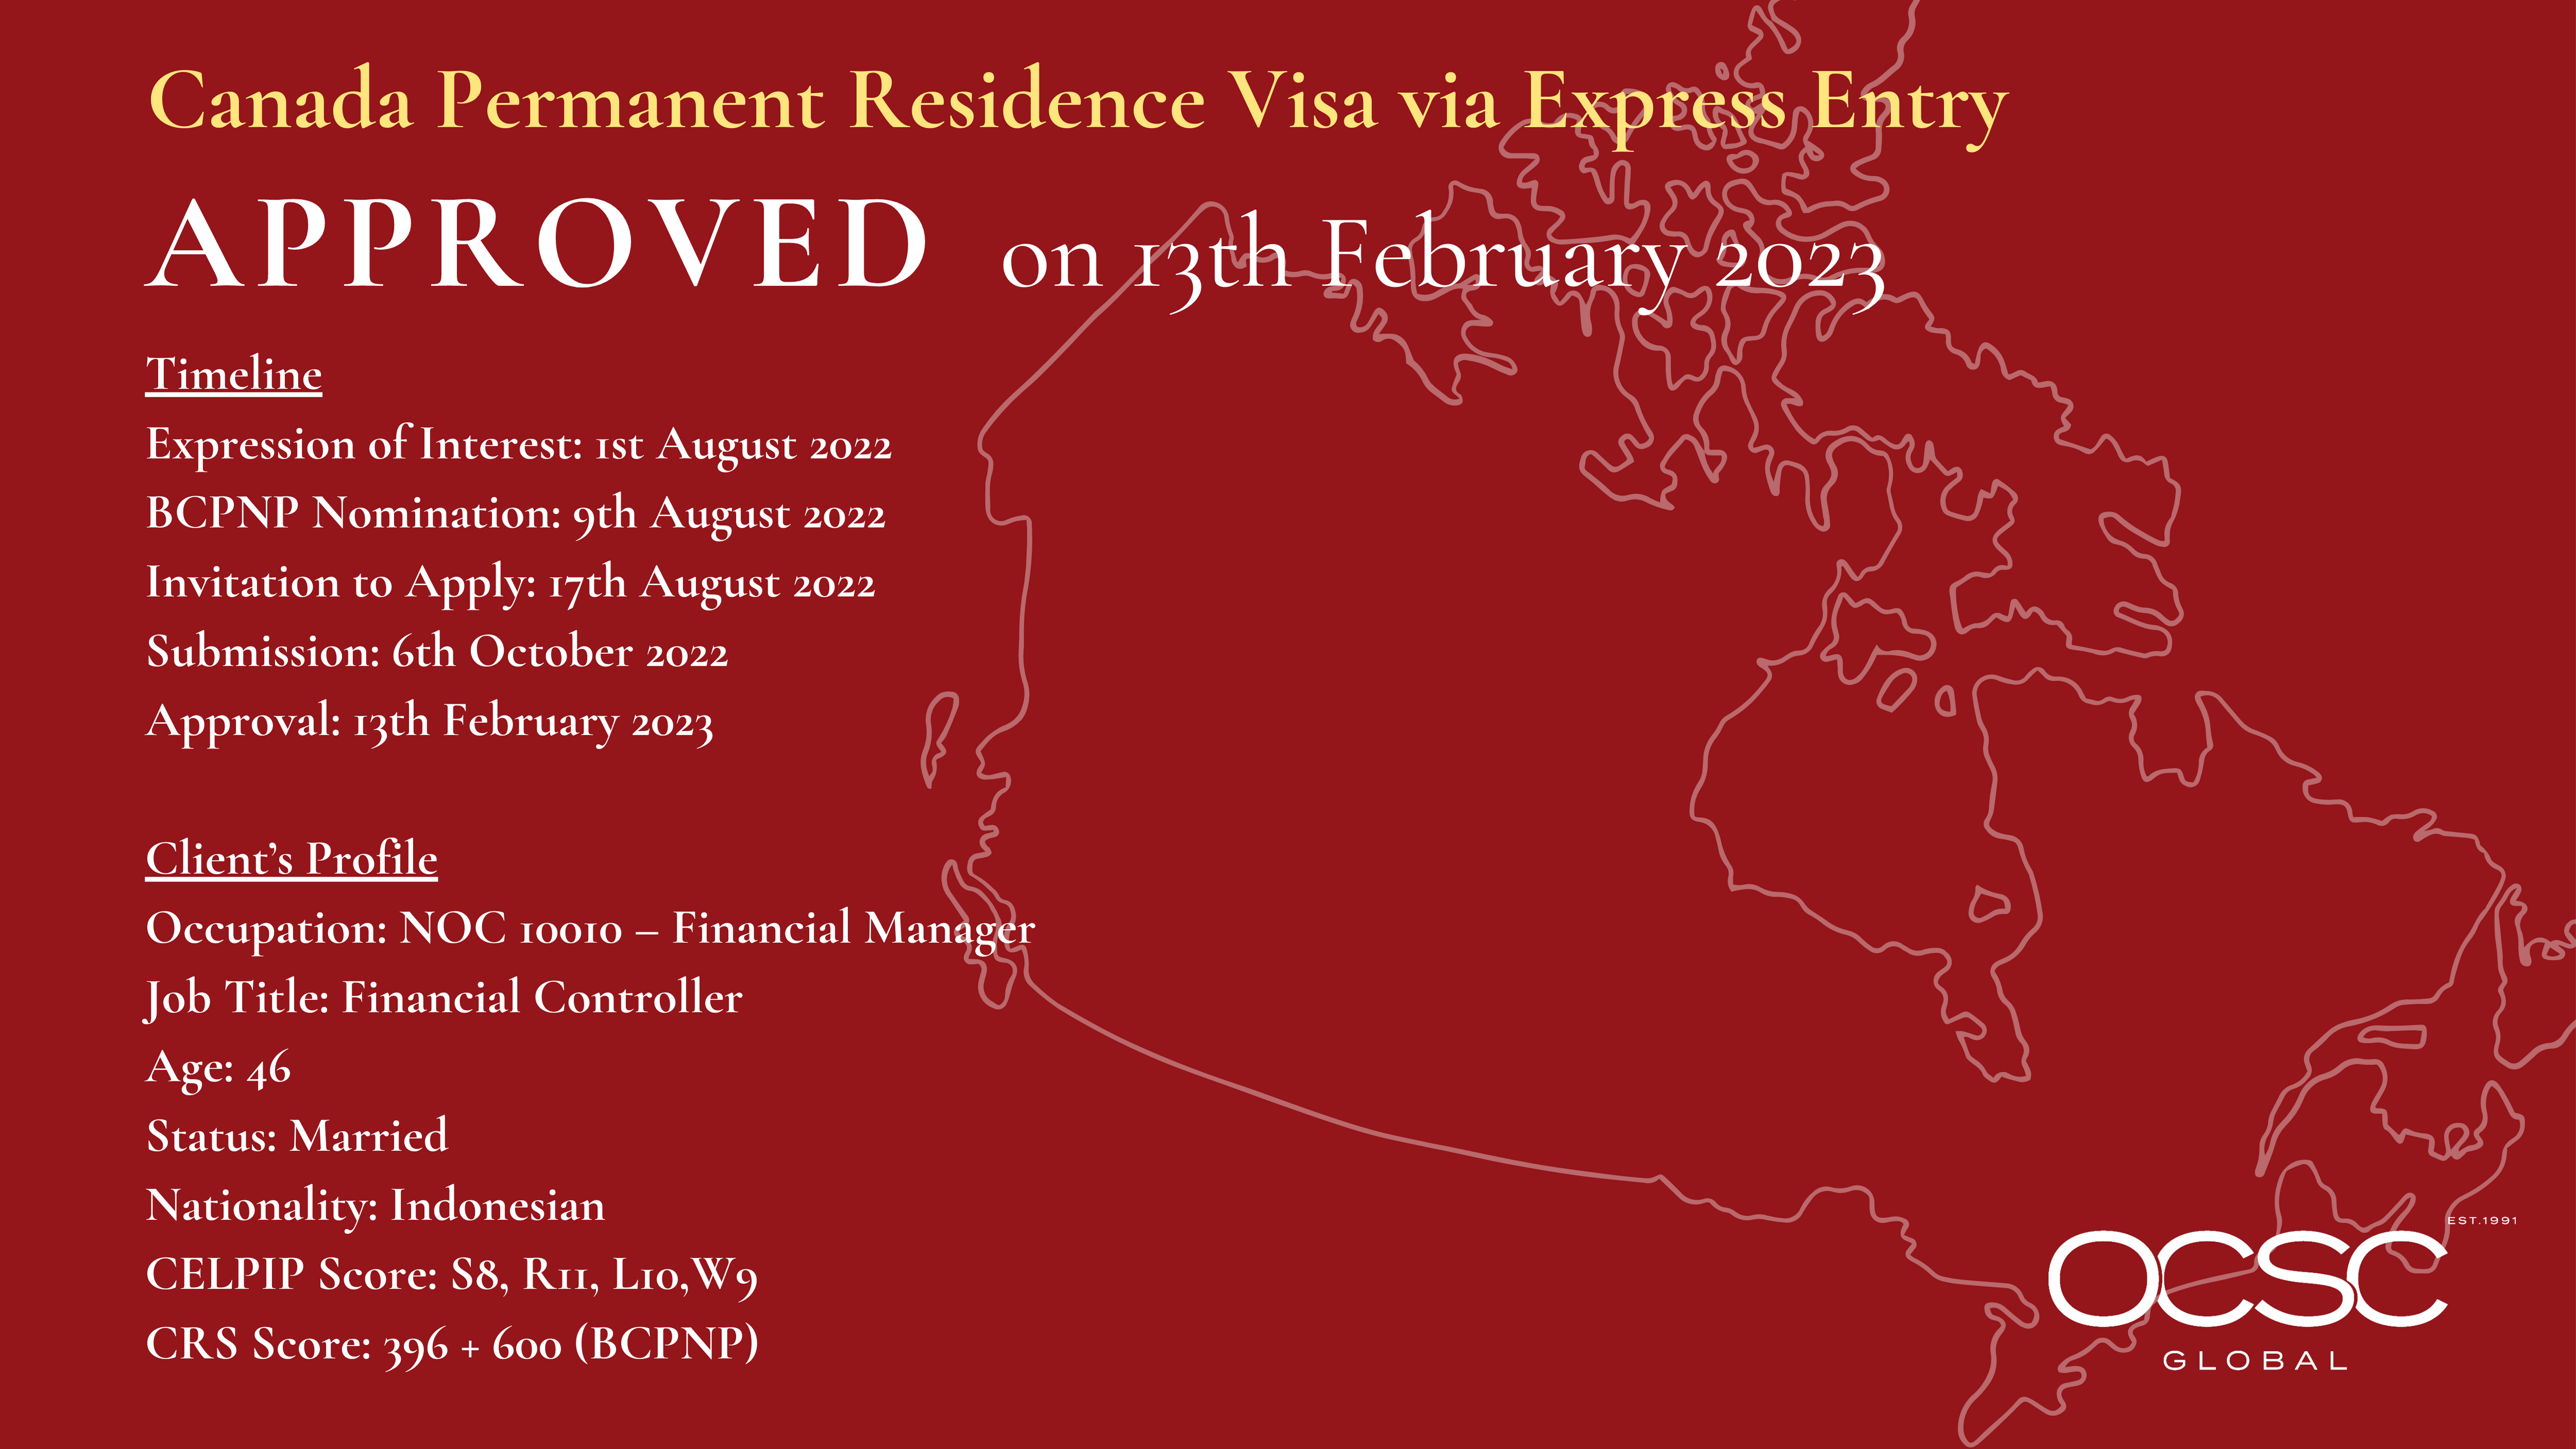 Canada Permanent Residence Visa Approved 13-Feb